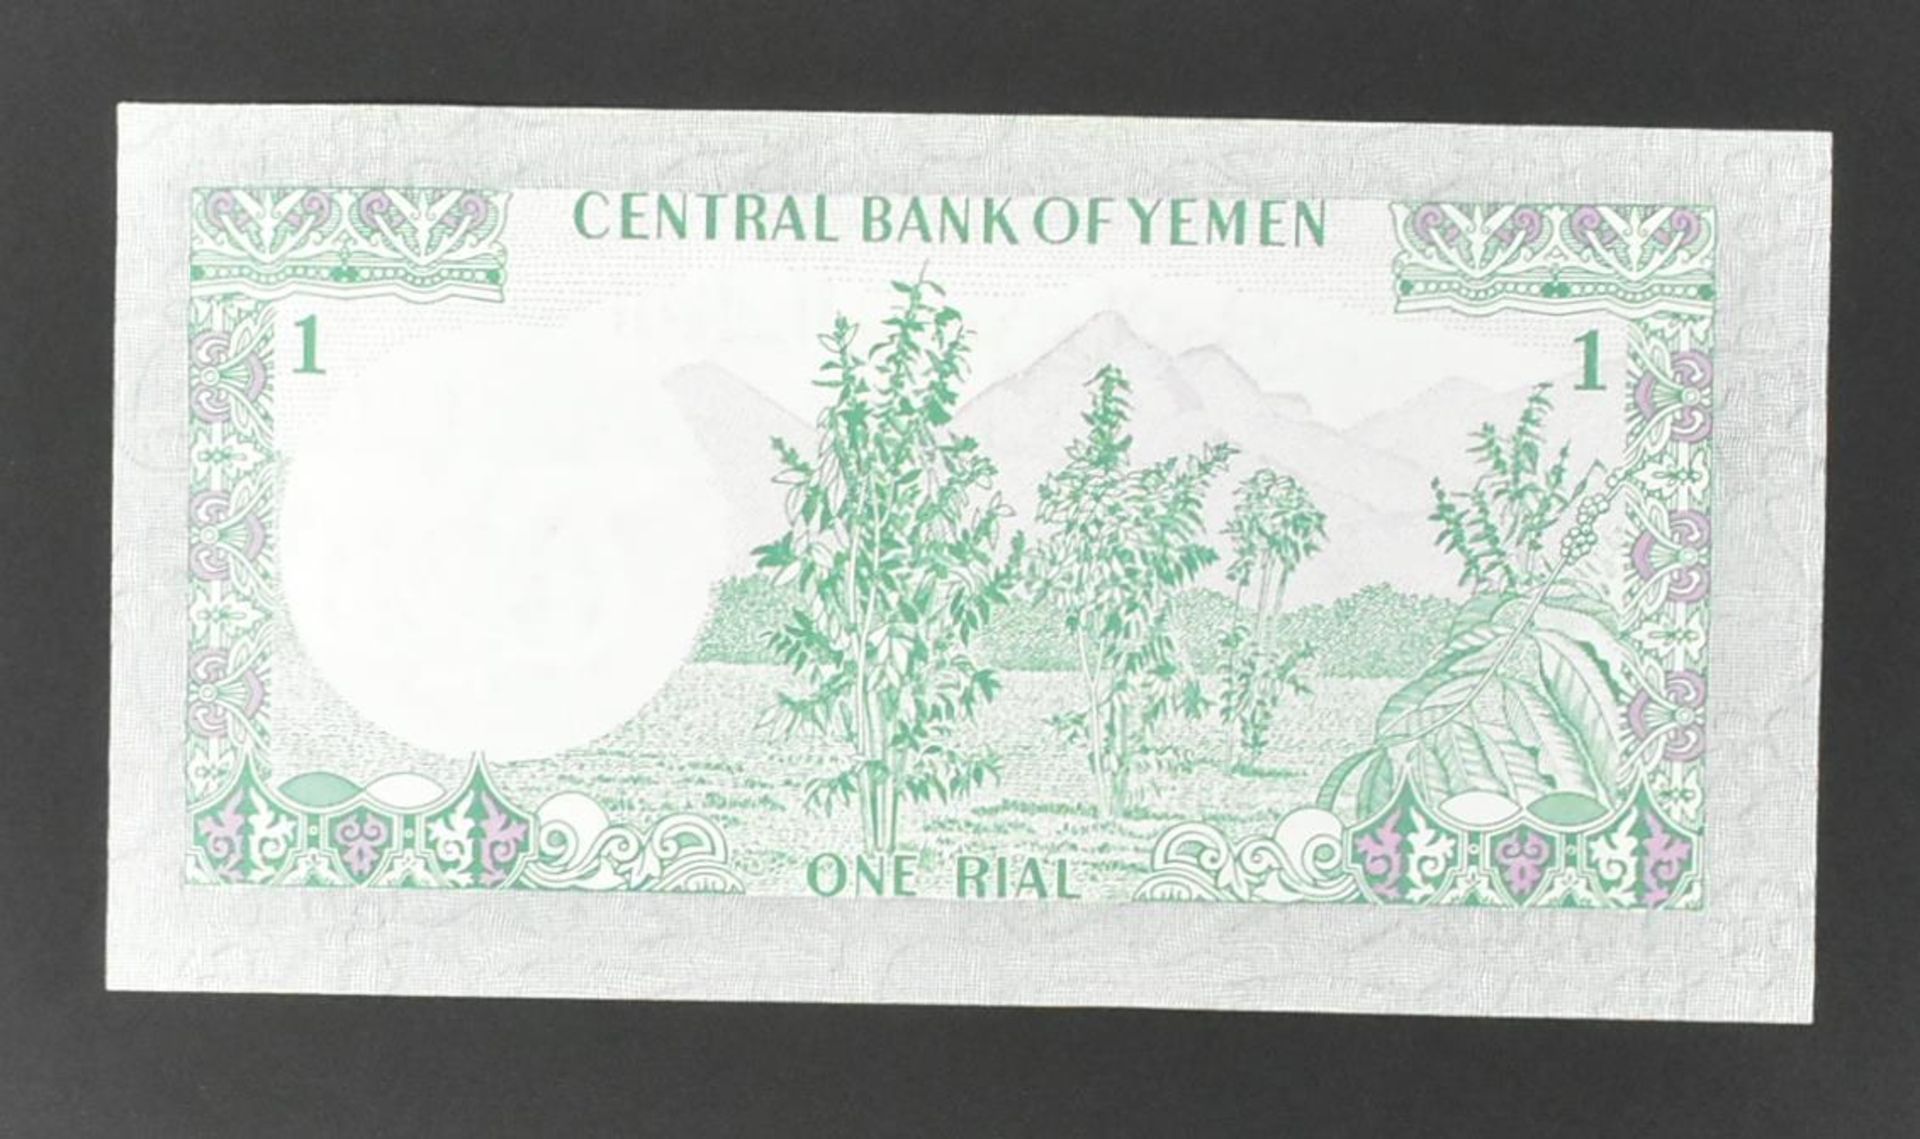 COLLECTION OF INTERNATIONAL UNCIRCULATED BANK NOTES - Image 21 of 36